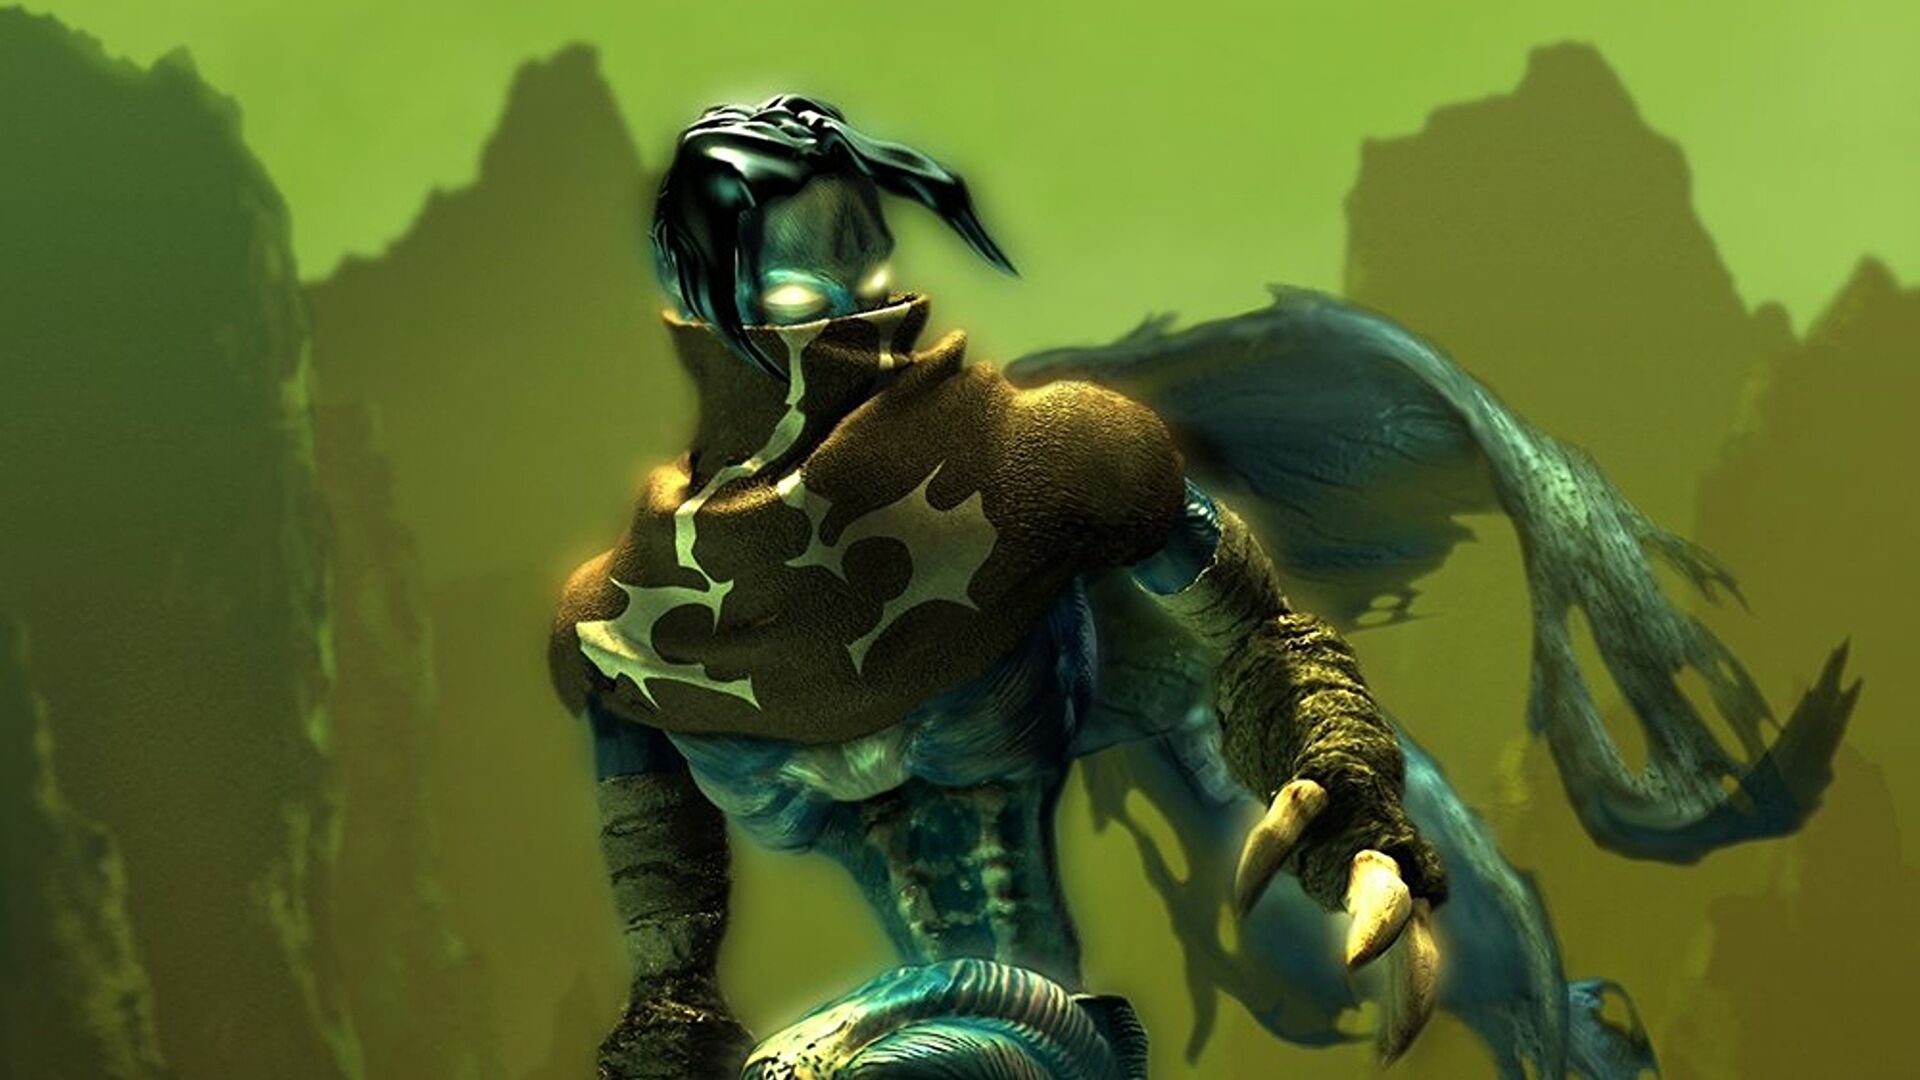 Legacy Of Kain devs Crystal Dynamics seek opinions about new games in the series